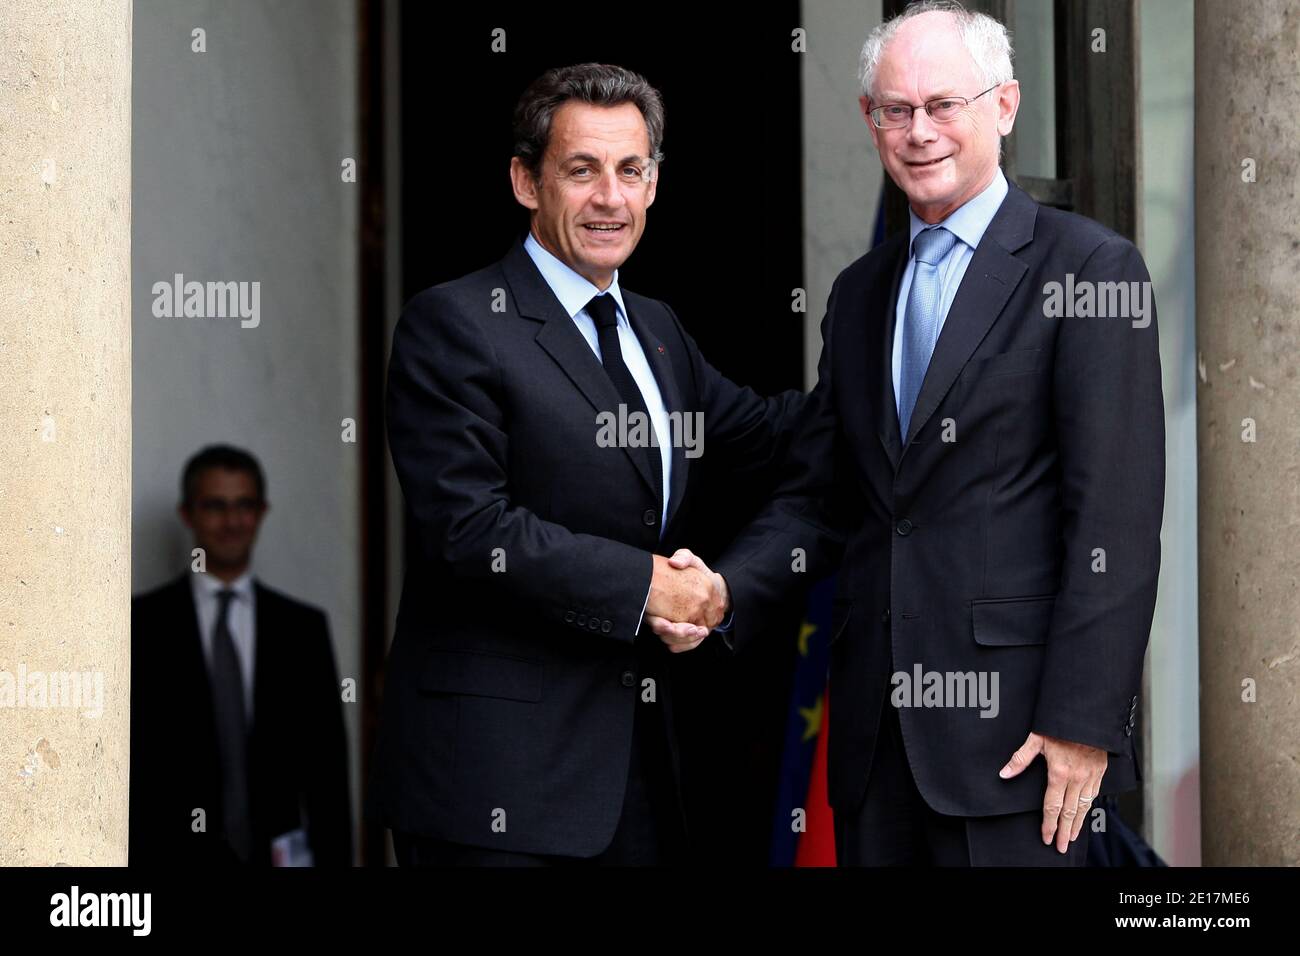 French president Nicolas Sarkozy welcomes European Union president Herman Van Rompuy prior to a working lunch at the Elysee presidential palace in Paris, France on june 15, 2011. Photo by Stephane Lemouton/ABACAPRESS.COM Stock Photo